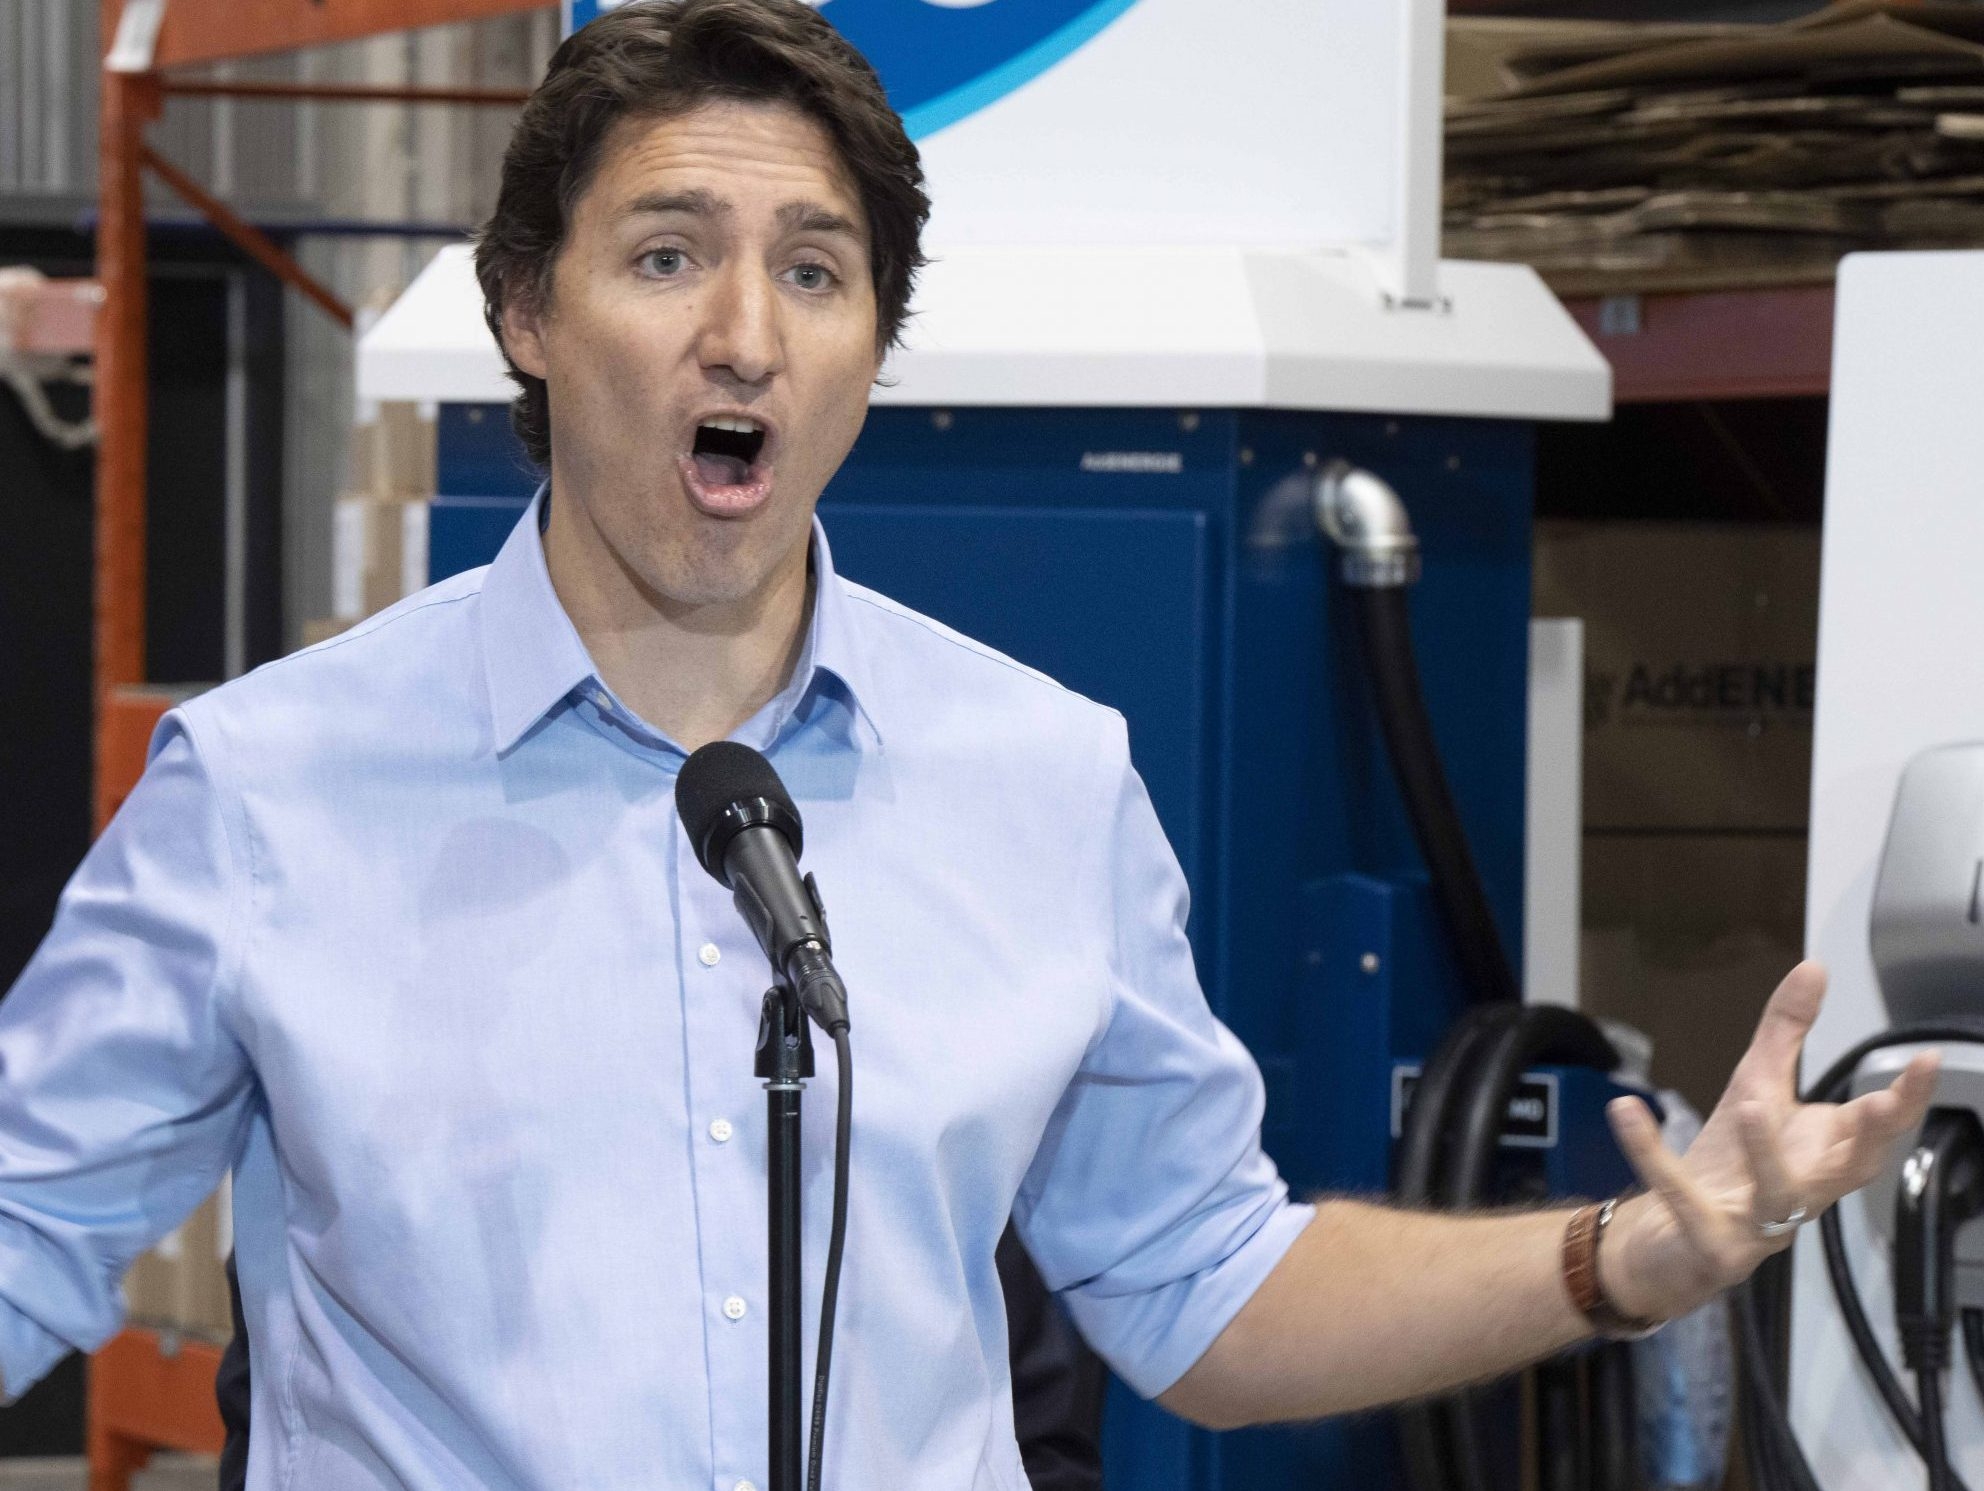 LILLEY UNLEASHED: Does Trudeau hurt the Liberal party more than he helps it?